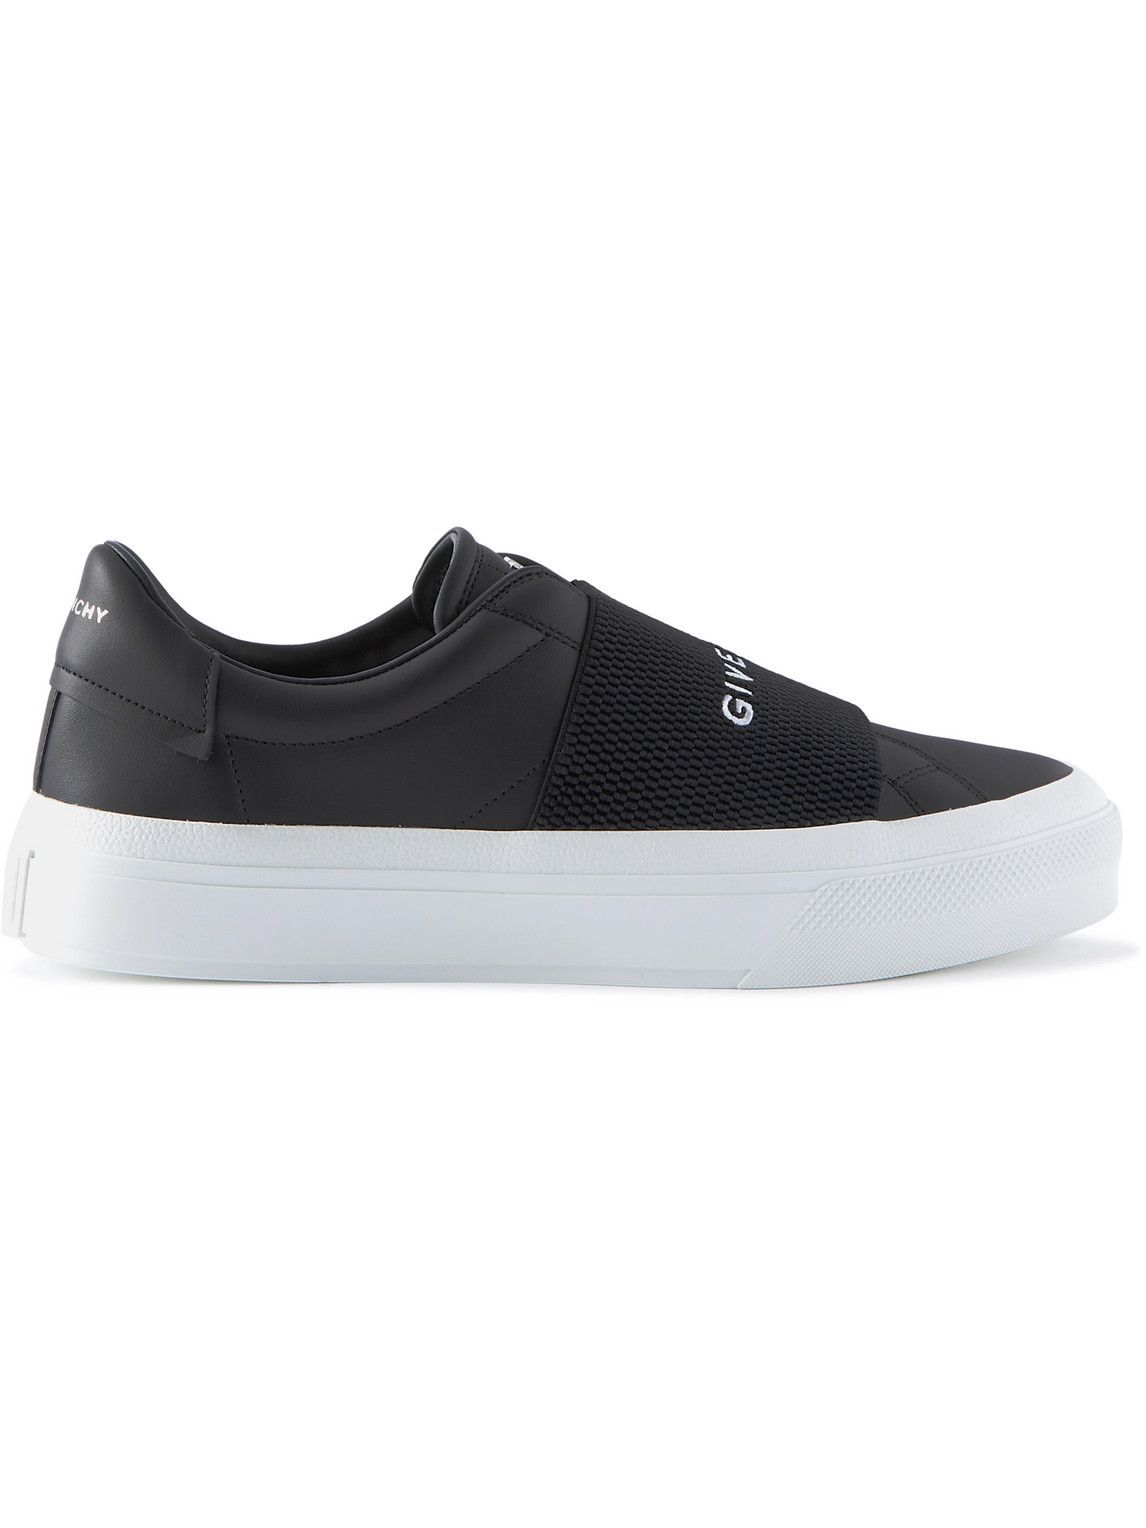 Givenchy City Court Leather Sneakers Black Givenchy